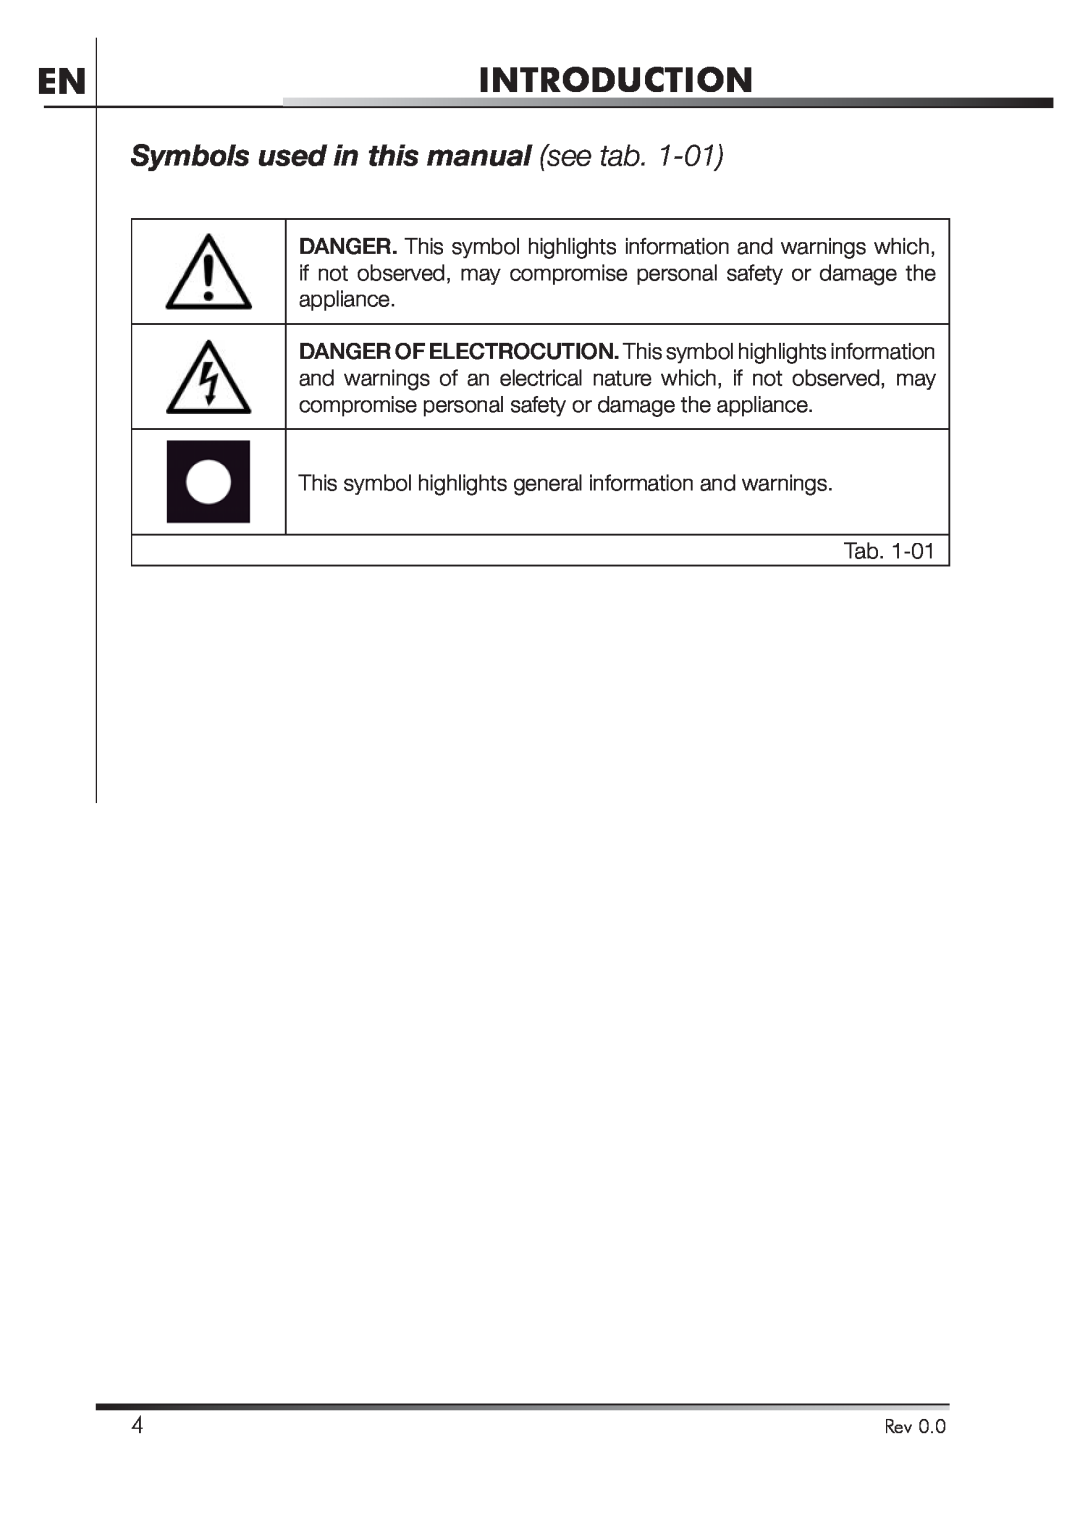 Smeg STA4645 instruction manual Introduction, Symbols used in this manual see tab 